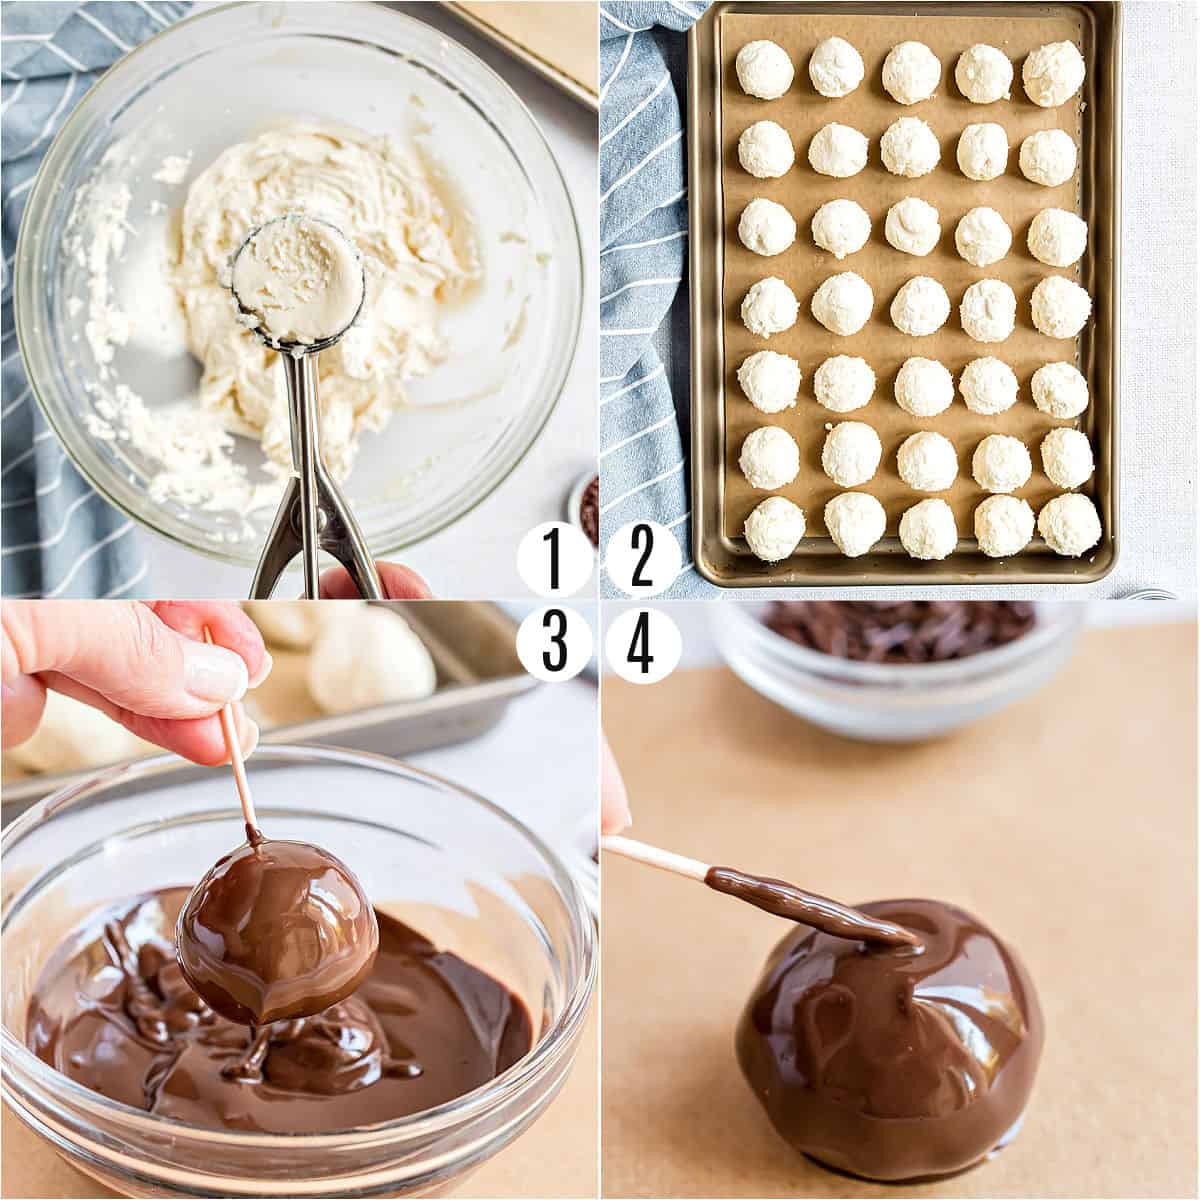 Step by step photos showing how to make chocolate buttercream truffles.